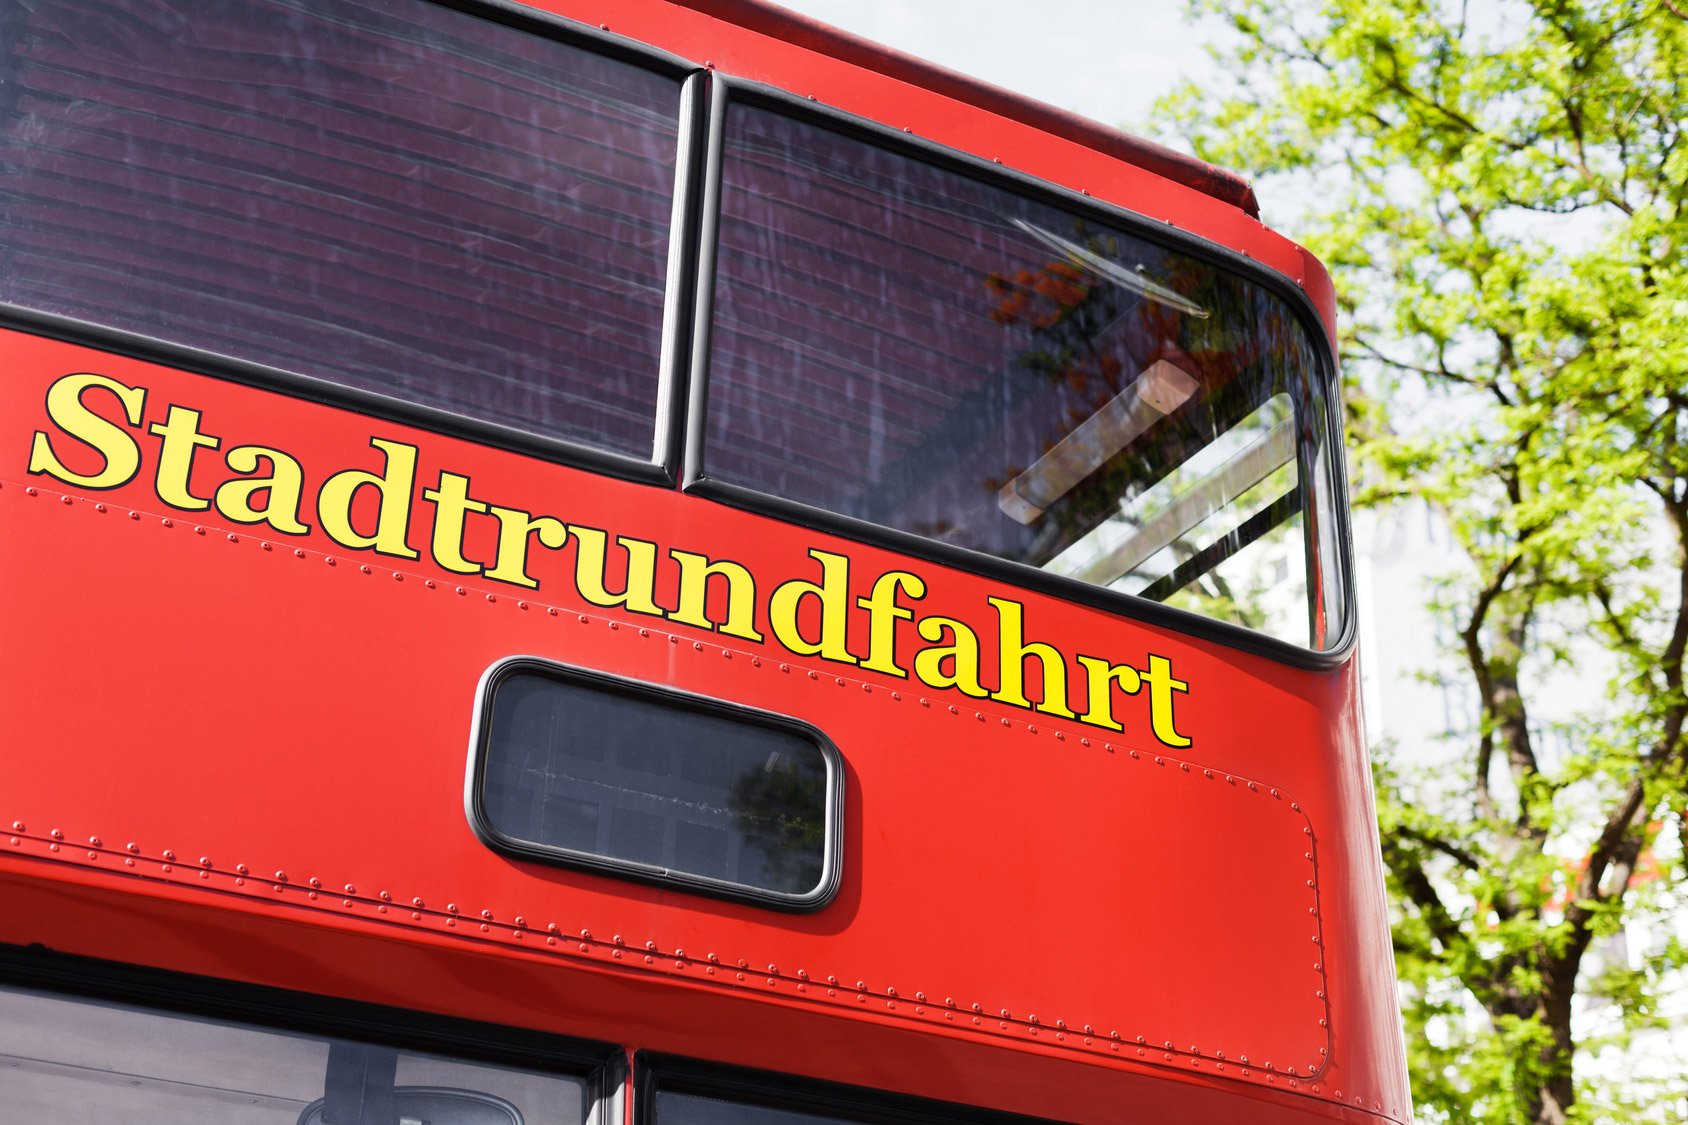 Details of a red double decker bus for city tours in Hamburg-City